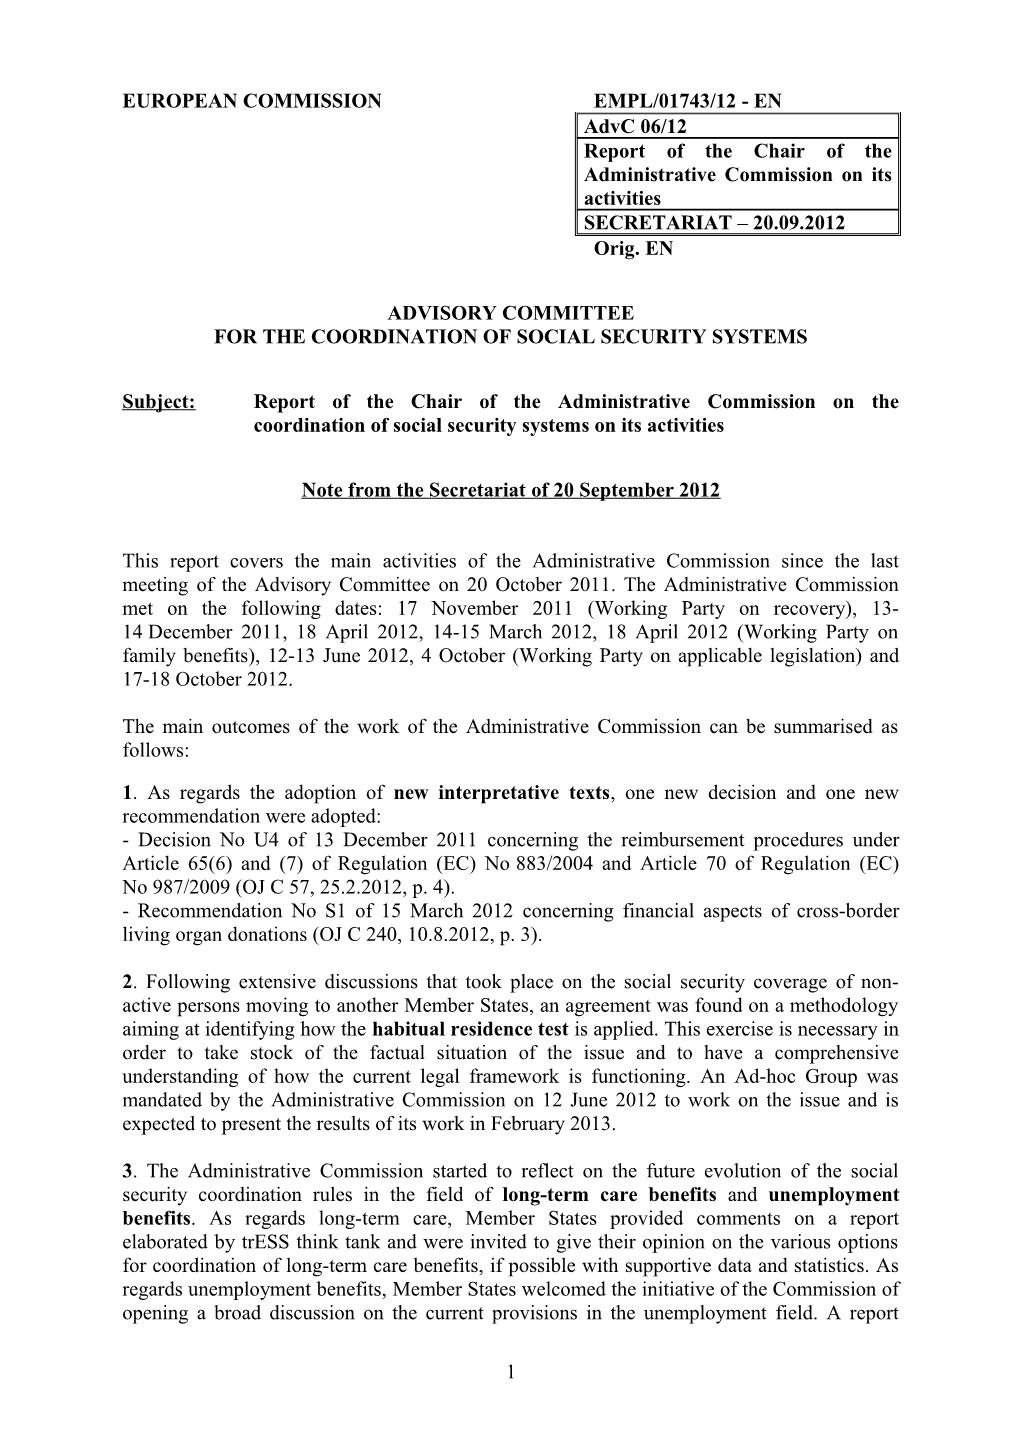 Report of the Chair of the Administrative Commission on Its Activities